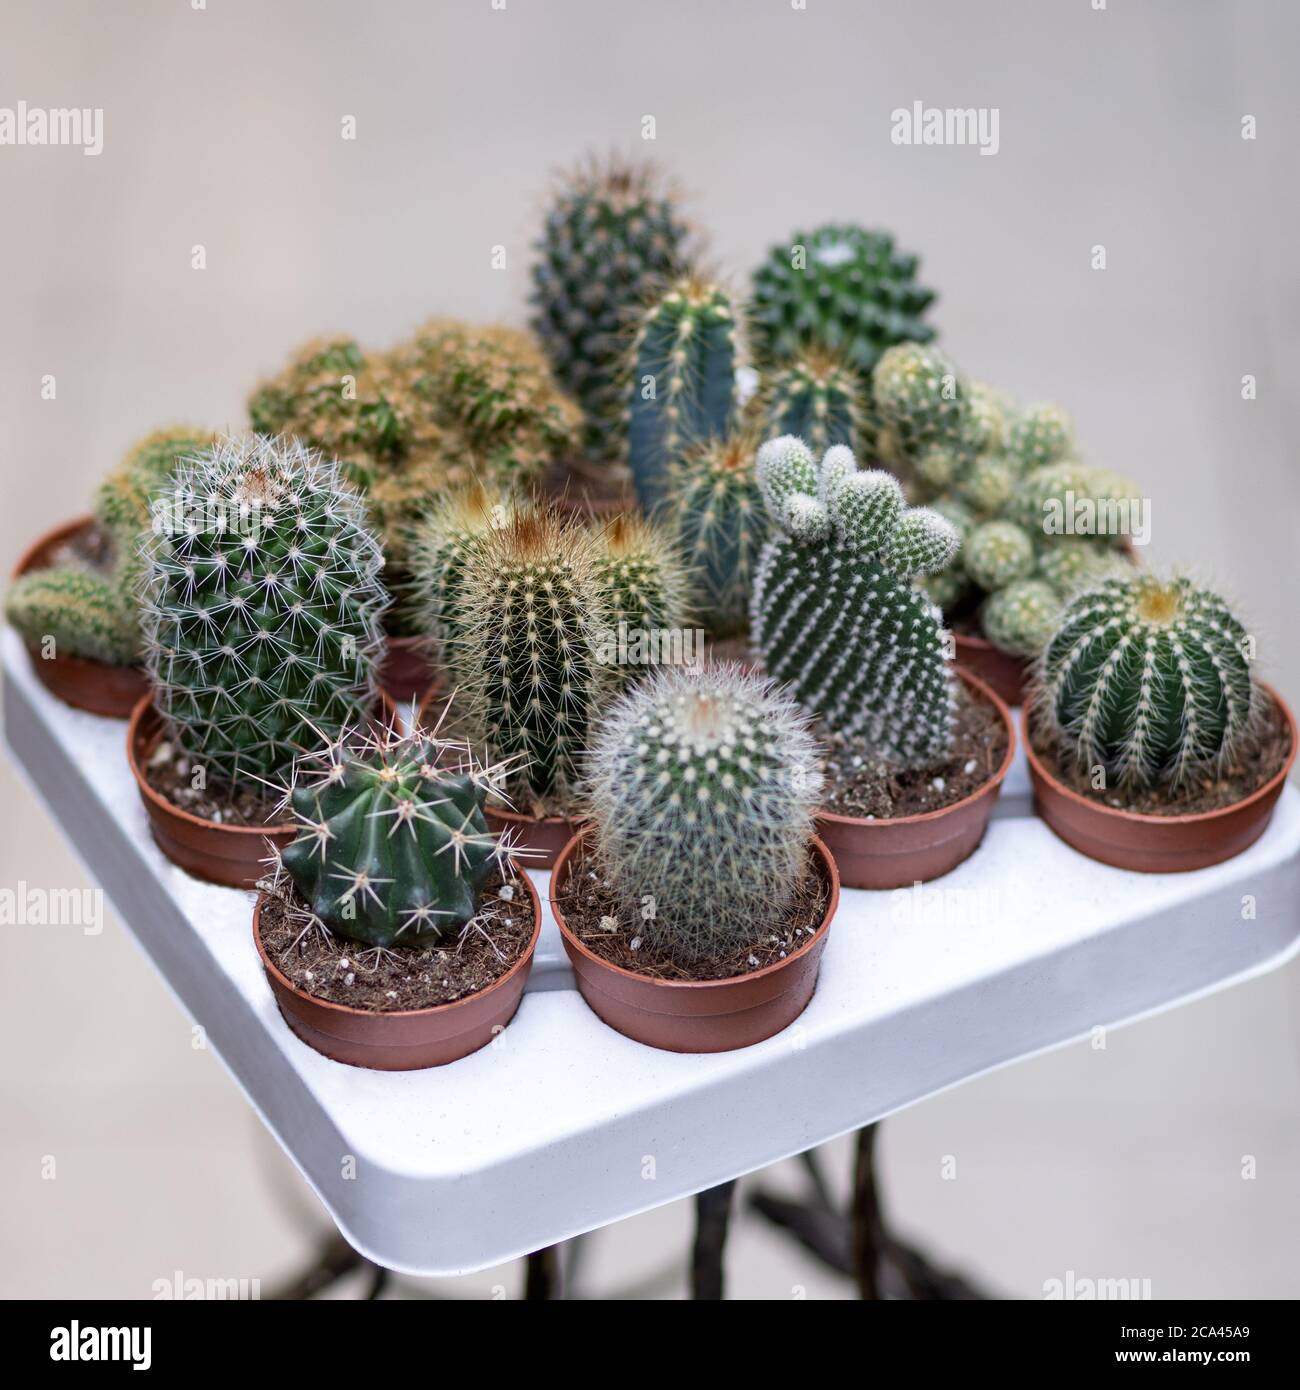 Different cactuses on the white plate Stock Photo